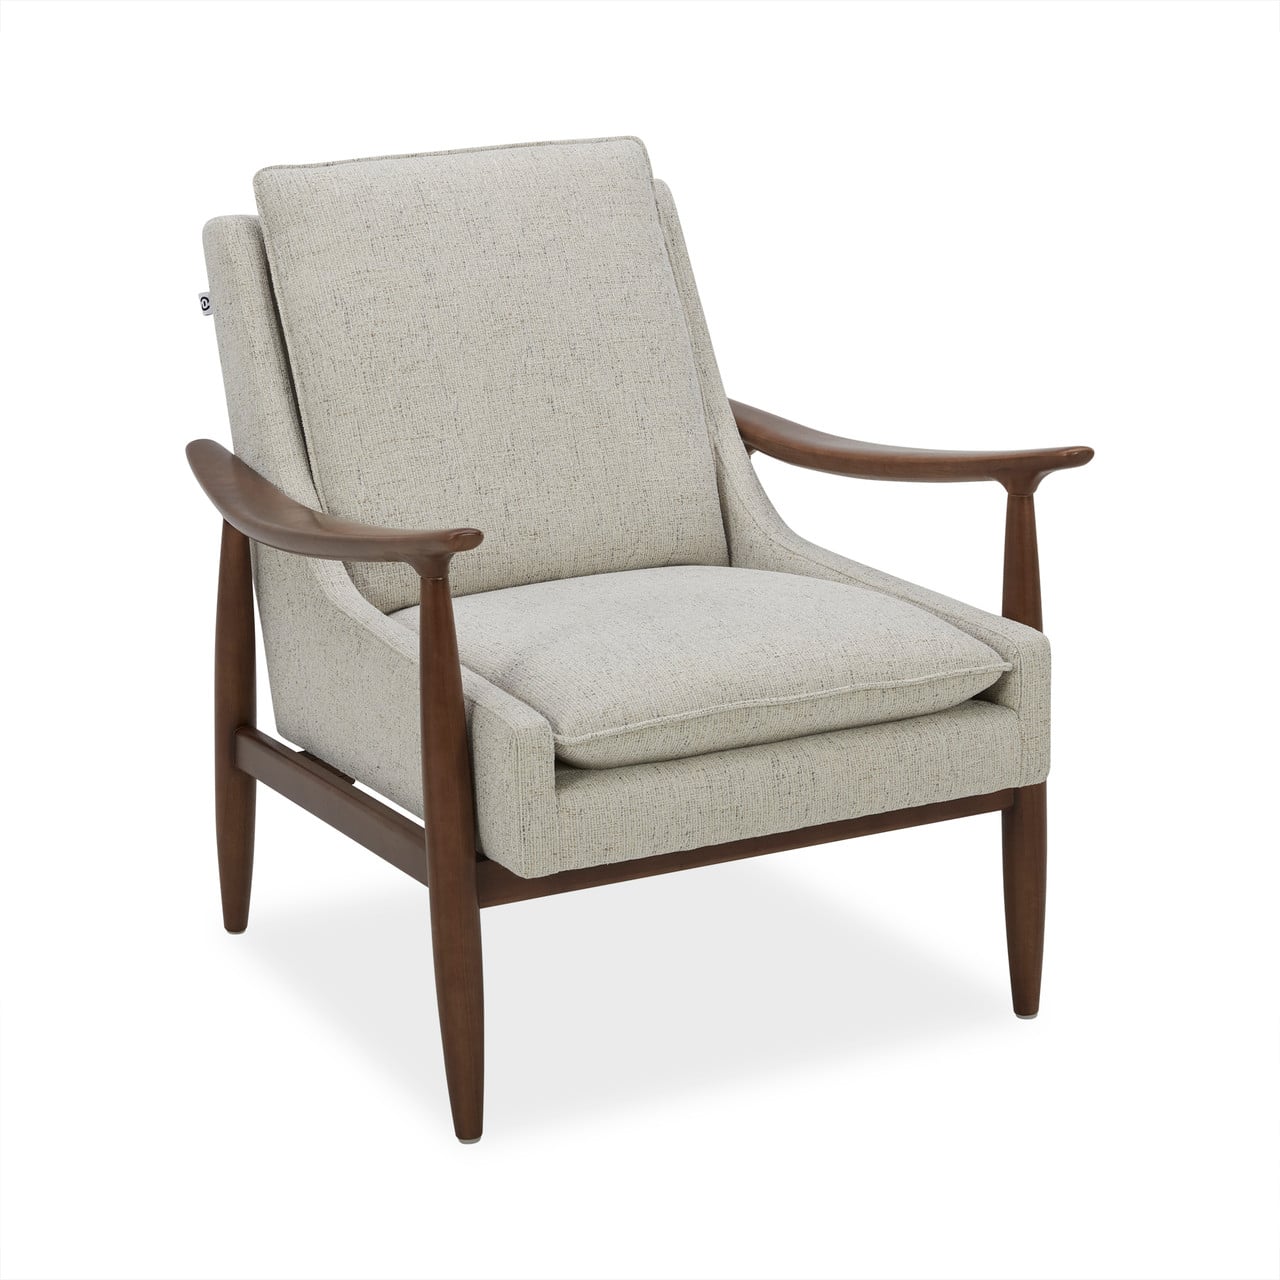 beige upholstered mid century modern lounge chair with wood arms and legs